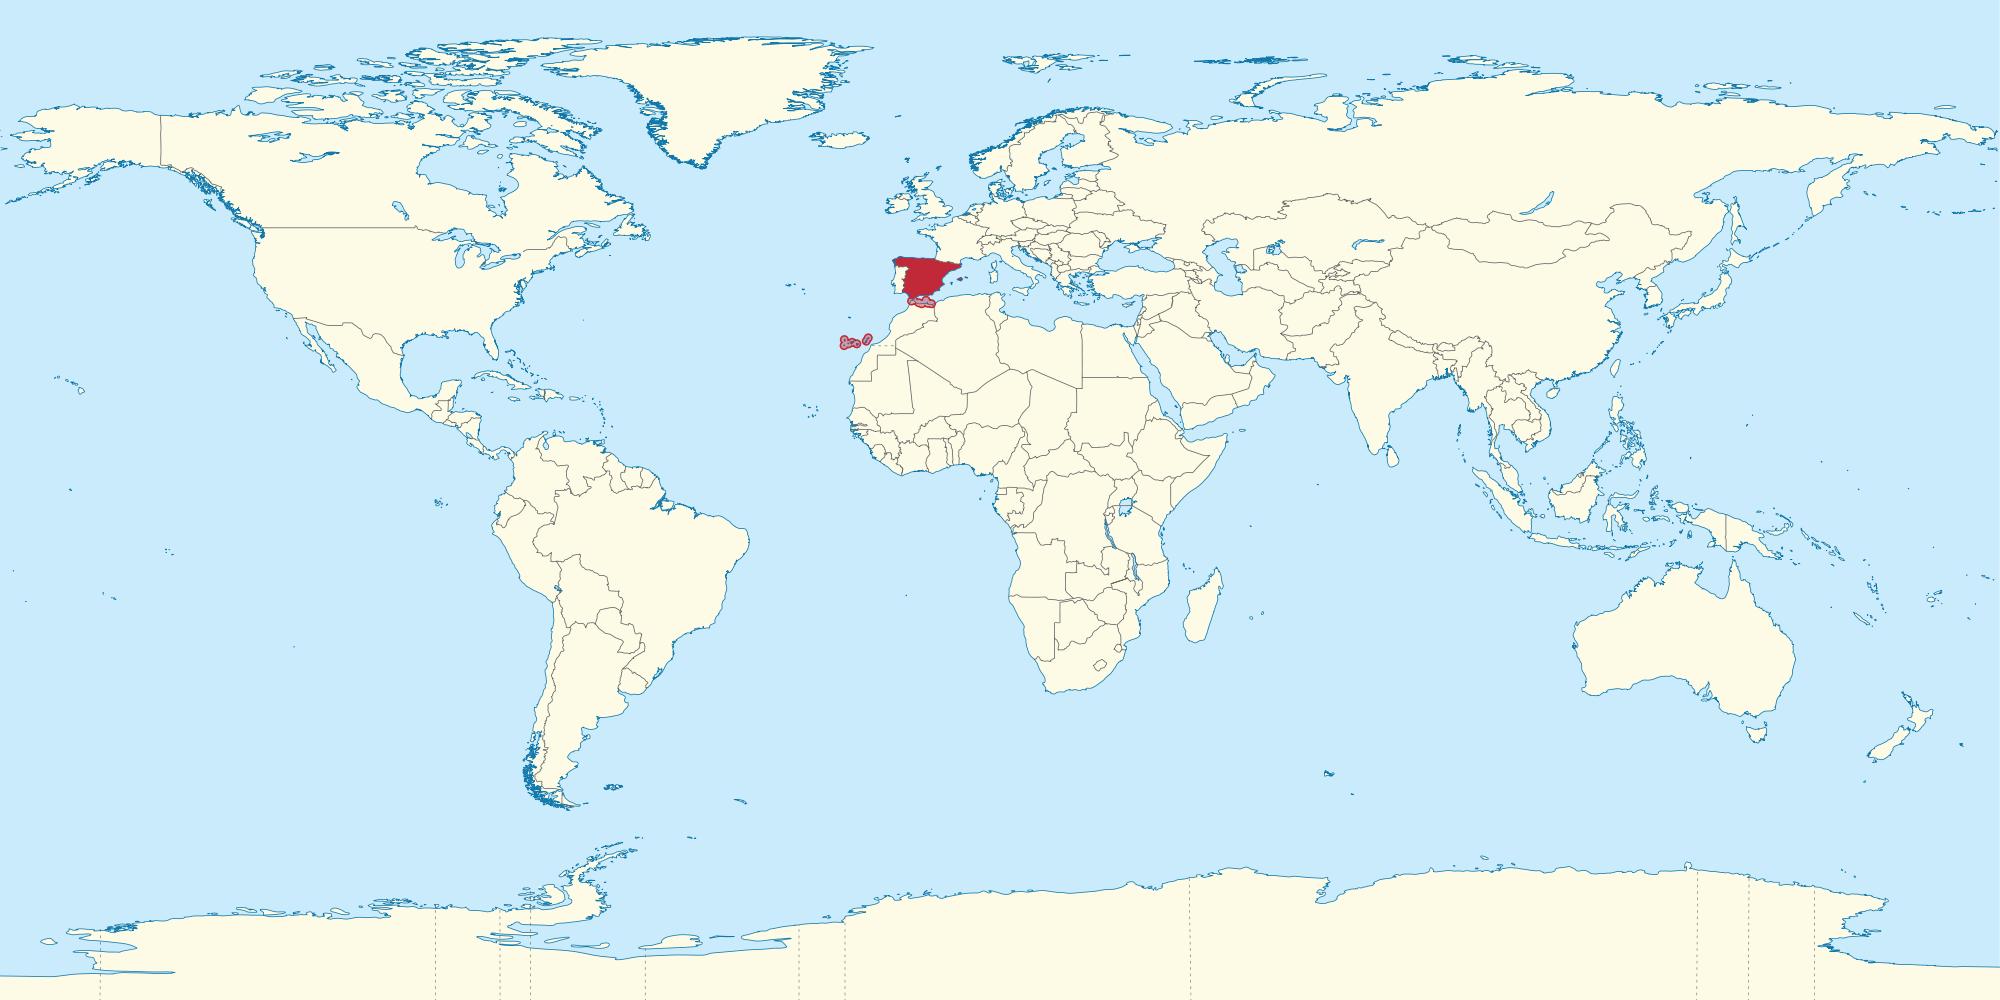 Spain Country In World Map World Map With Spain Highlighted